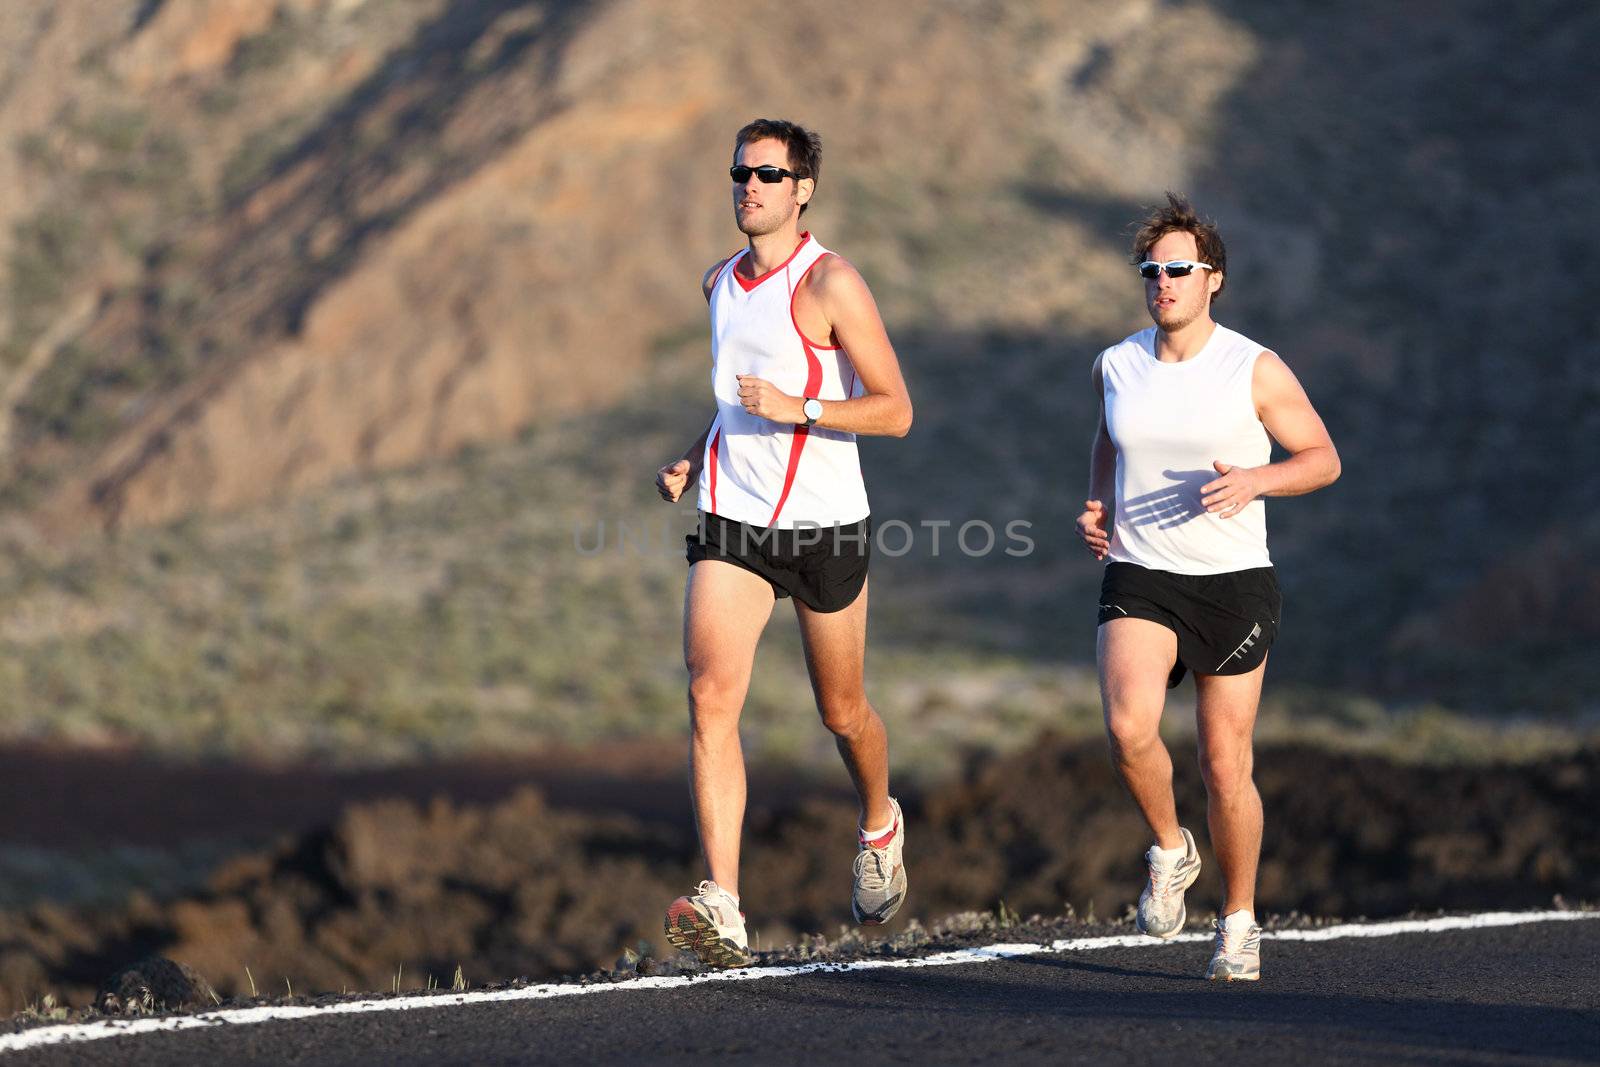 Runner men running marathon training run on road in amazing mountain landscape. Two men jogging in sporty outfit.